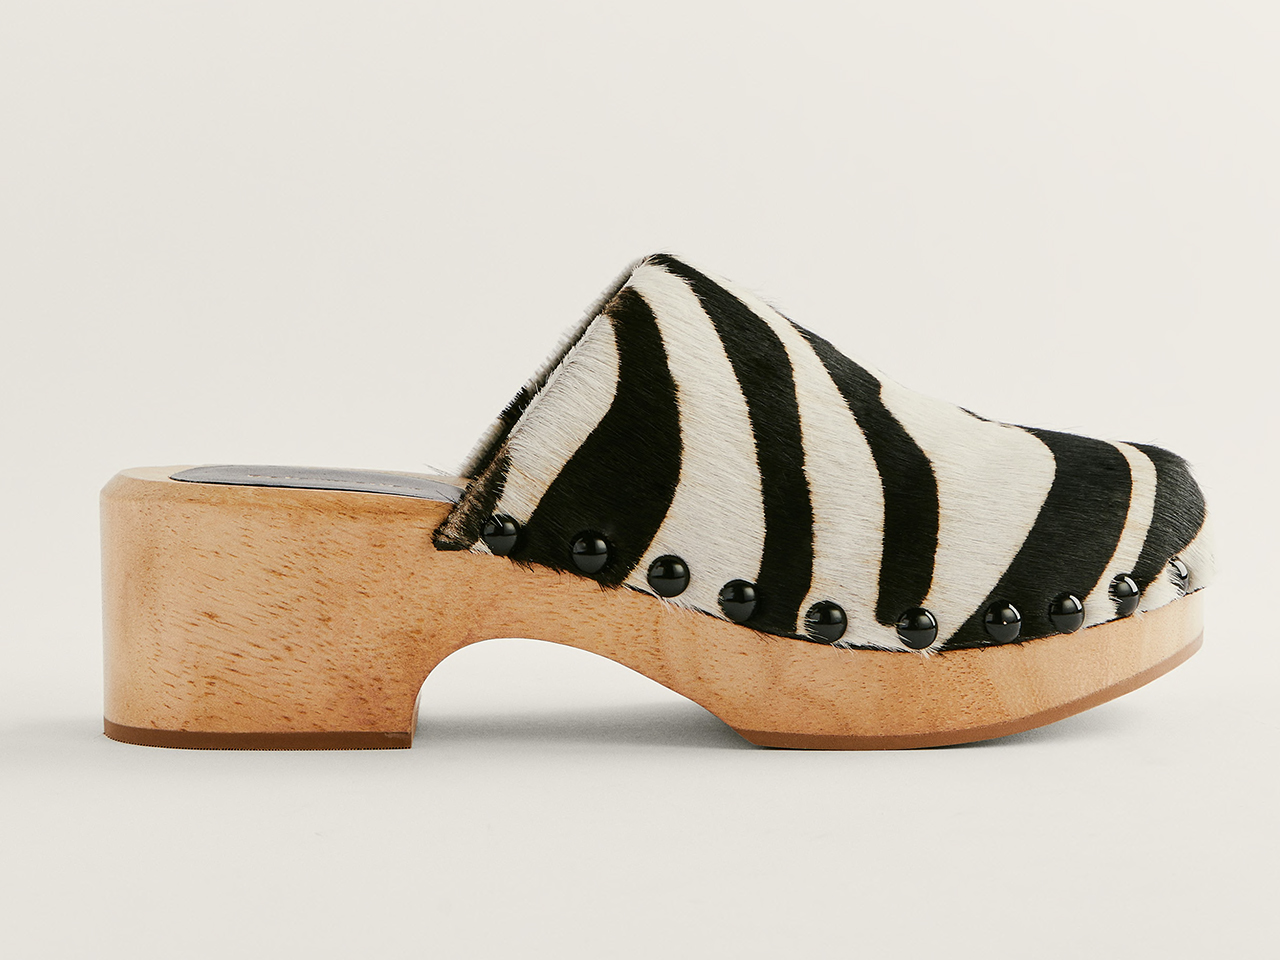 A side profile of leather and wood clogs from Reformation.